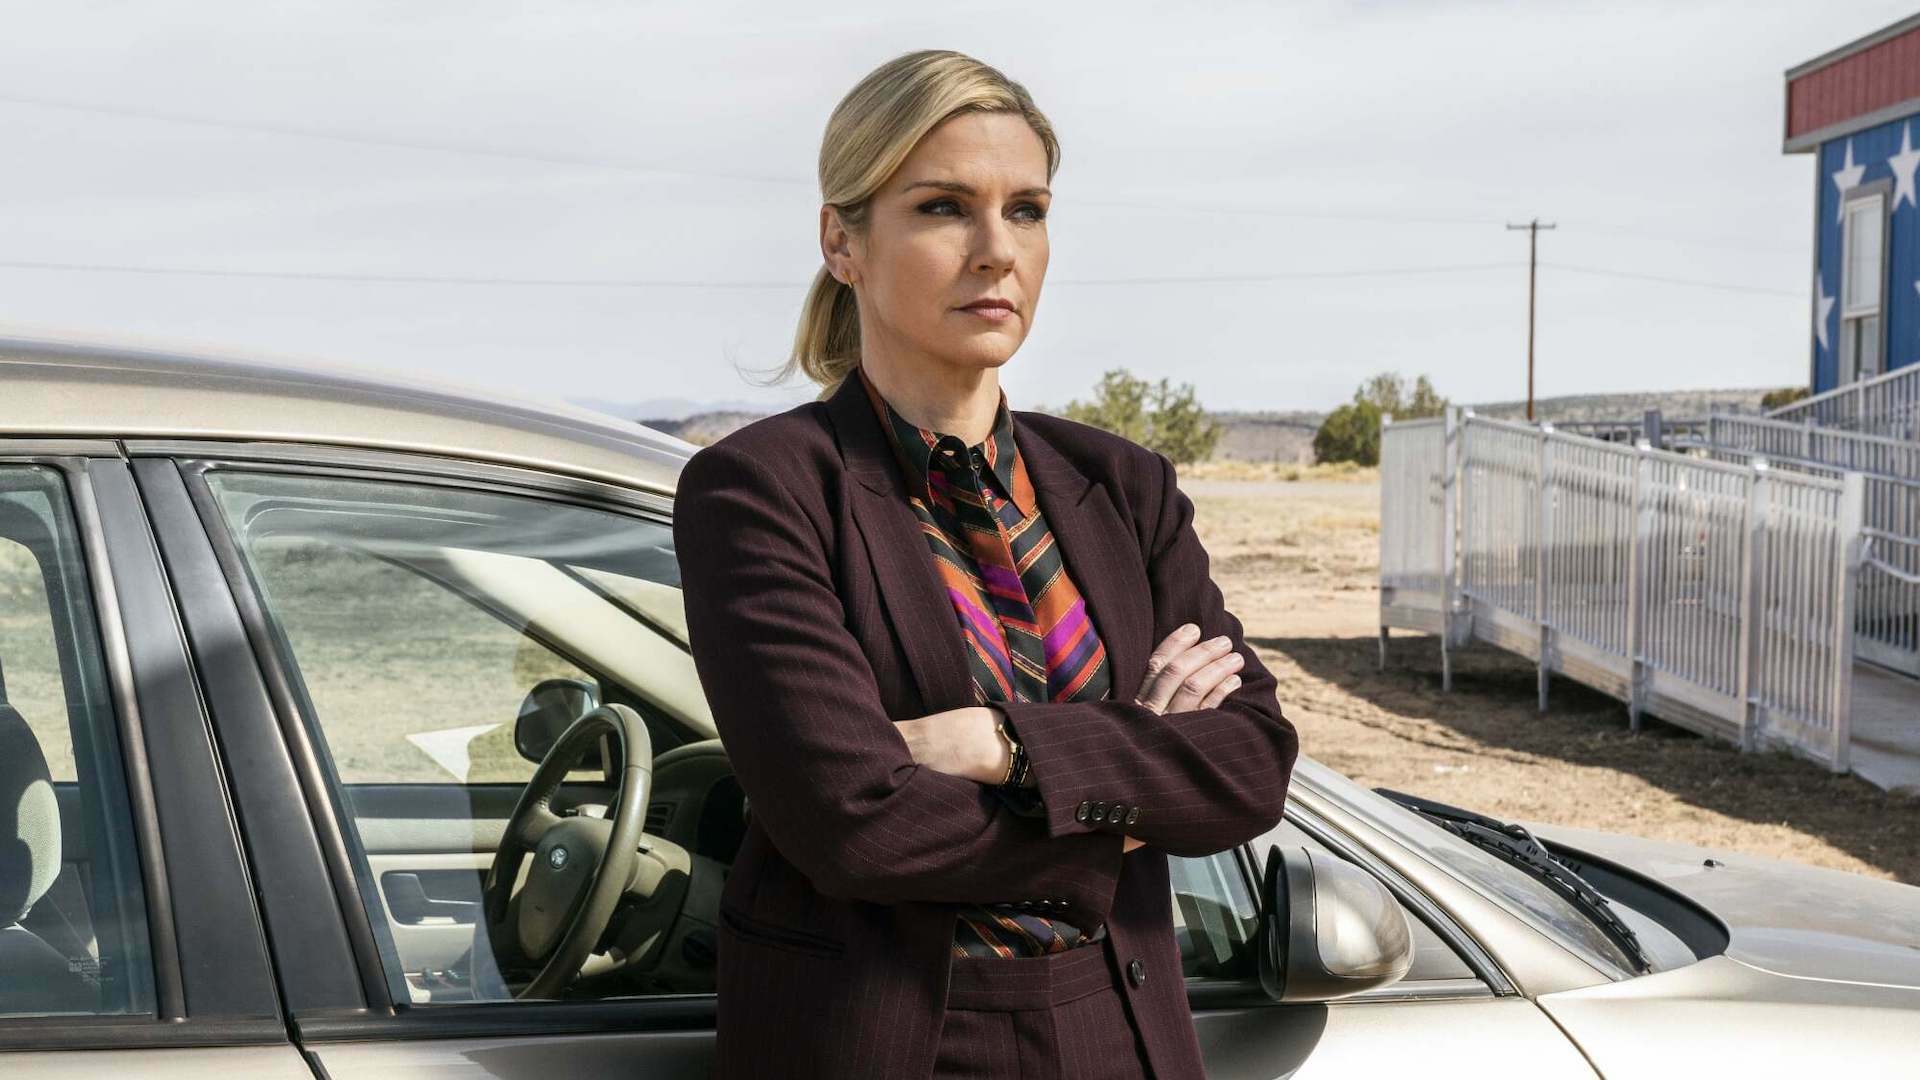 A woman in a suit leans against a car next to a building in the desert.